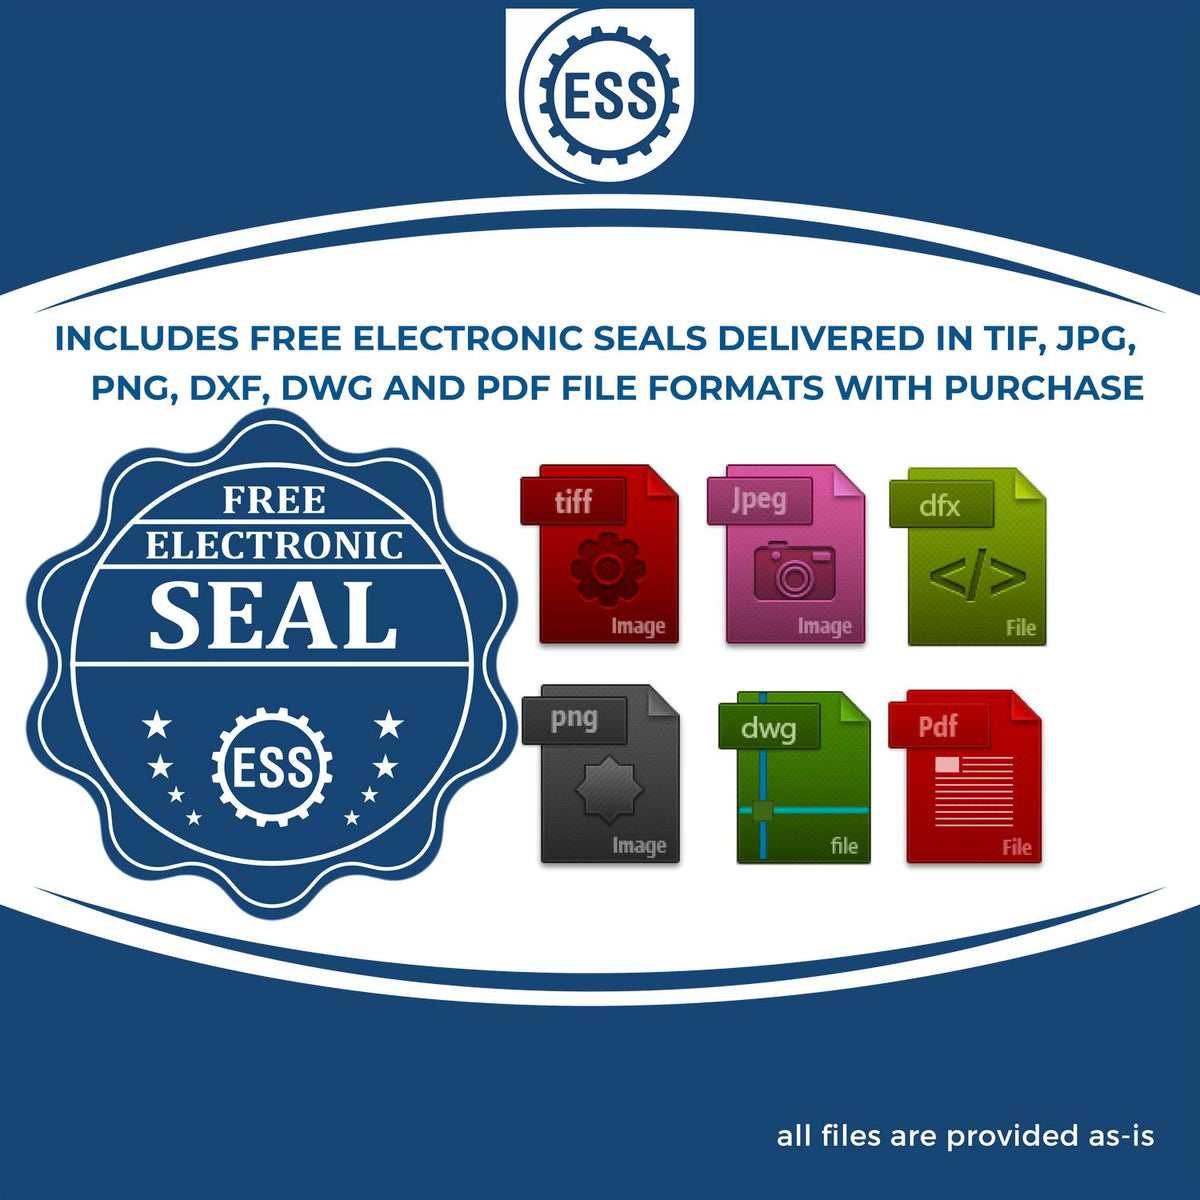 An infographic for the free electronic seal for the Premium MaxLight Pre-Inked Florida Engineering Stamp illustrating the different file type icons such as DXF, DWG, TIF, JPG and PNG.